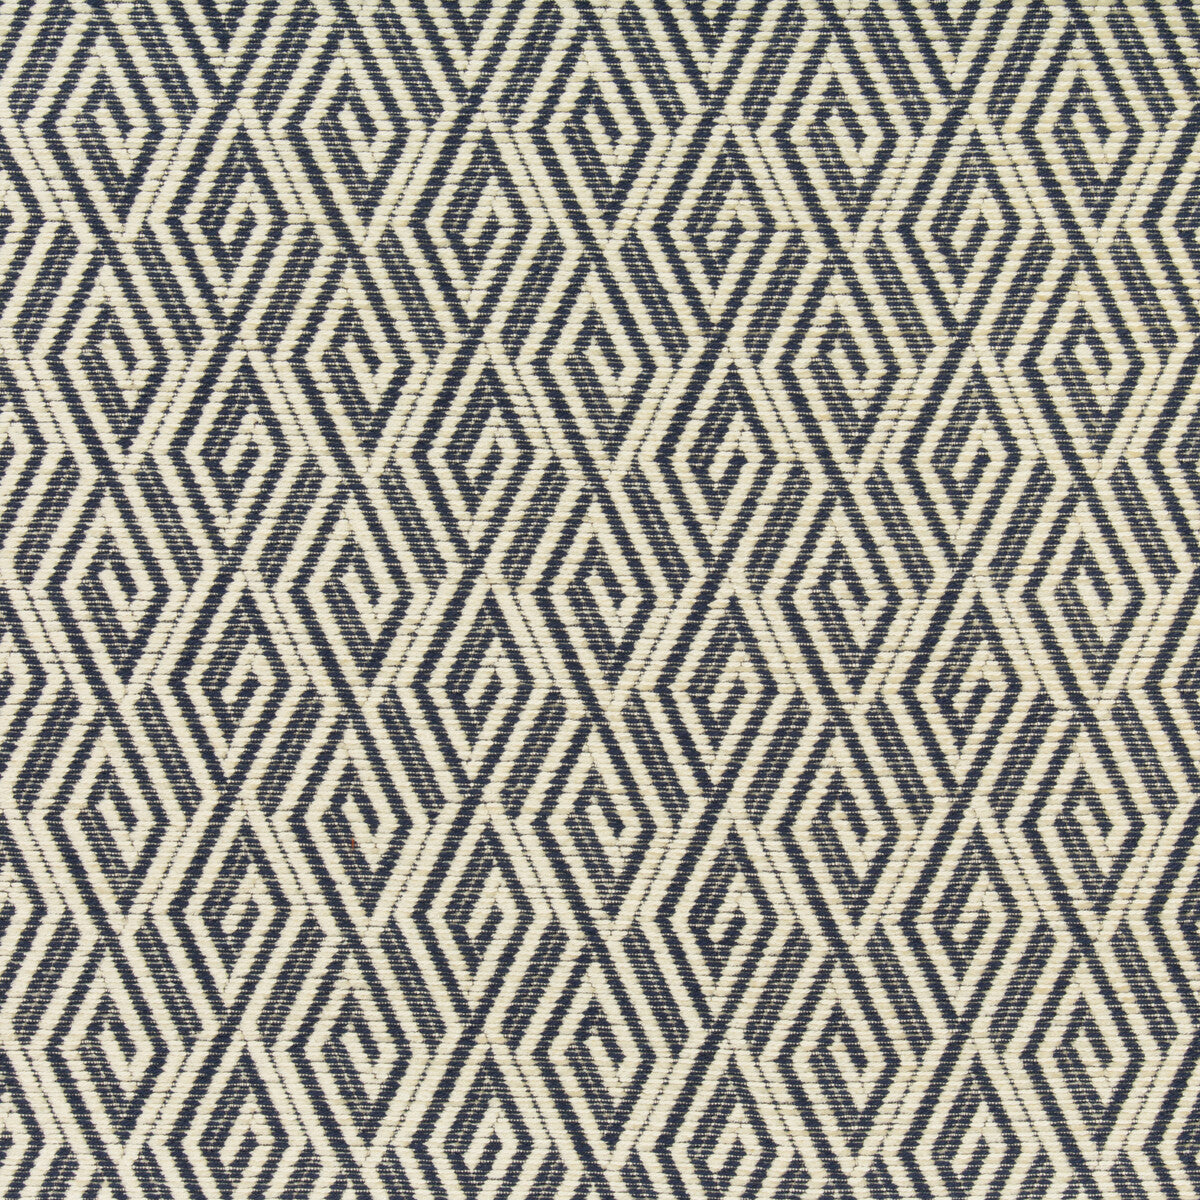 Kravet Design fabric in 34972-50 color - pattern 34972.50.0 - by Kravet Design in the Performance Crypton Home collection